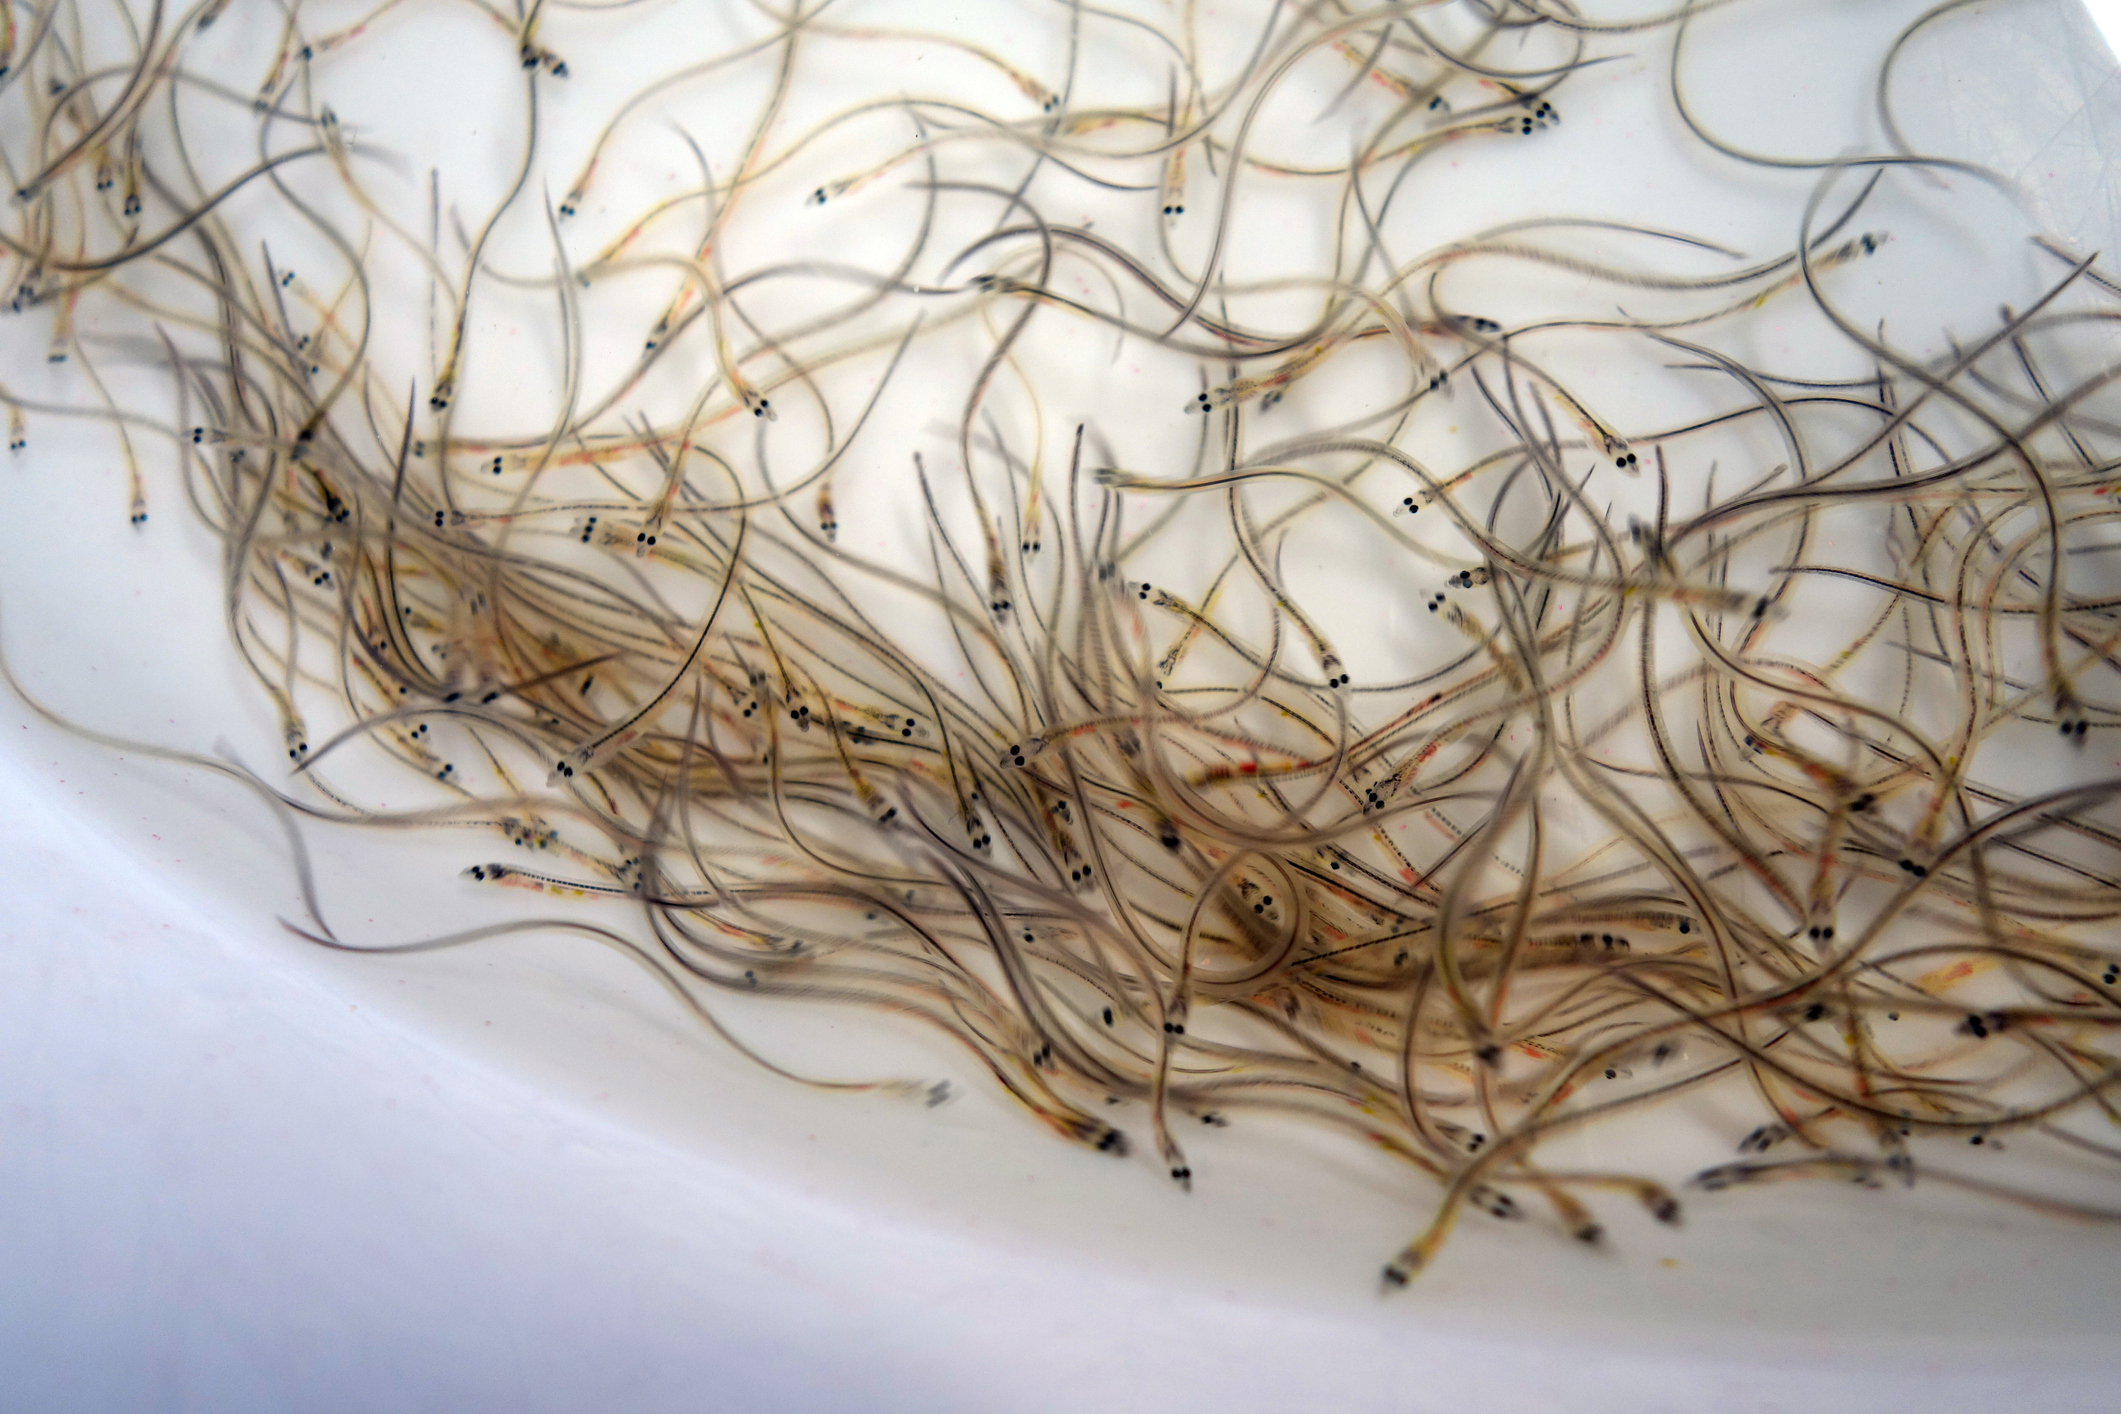 Mass of wriggling glass eels in a white bowl under bright light, with shallow depth of field